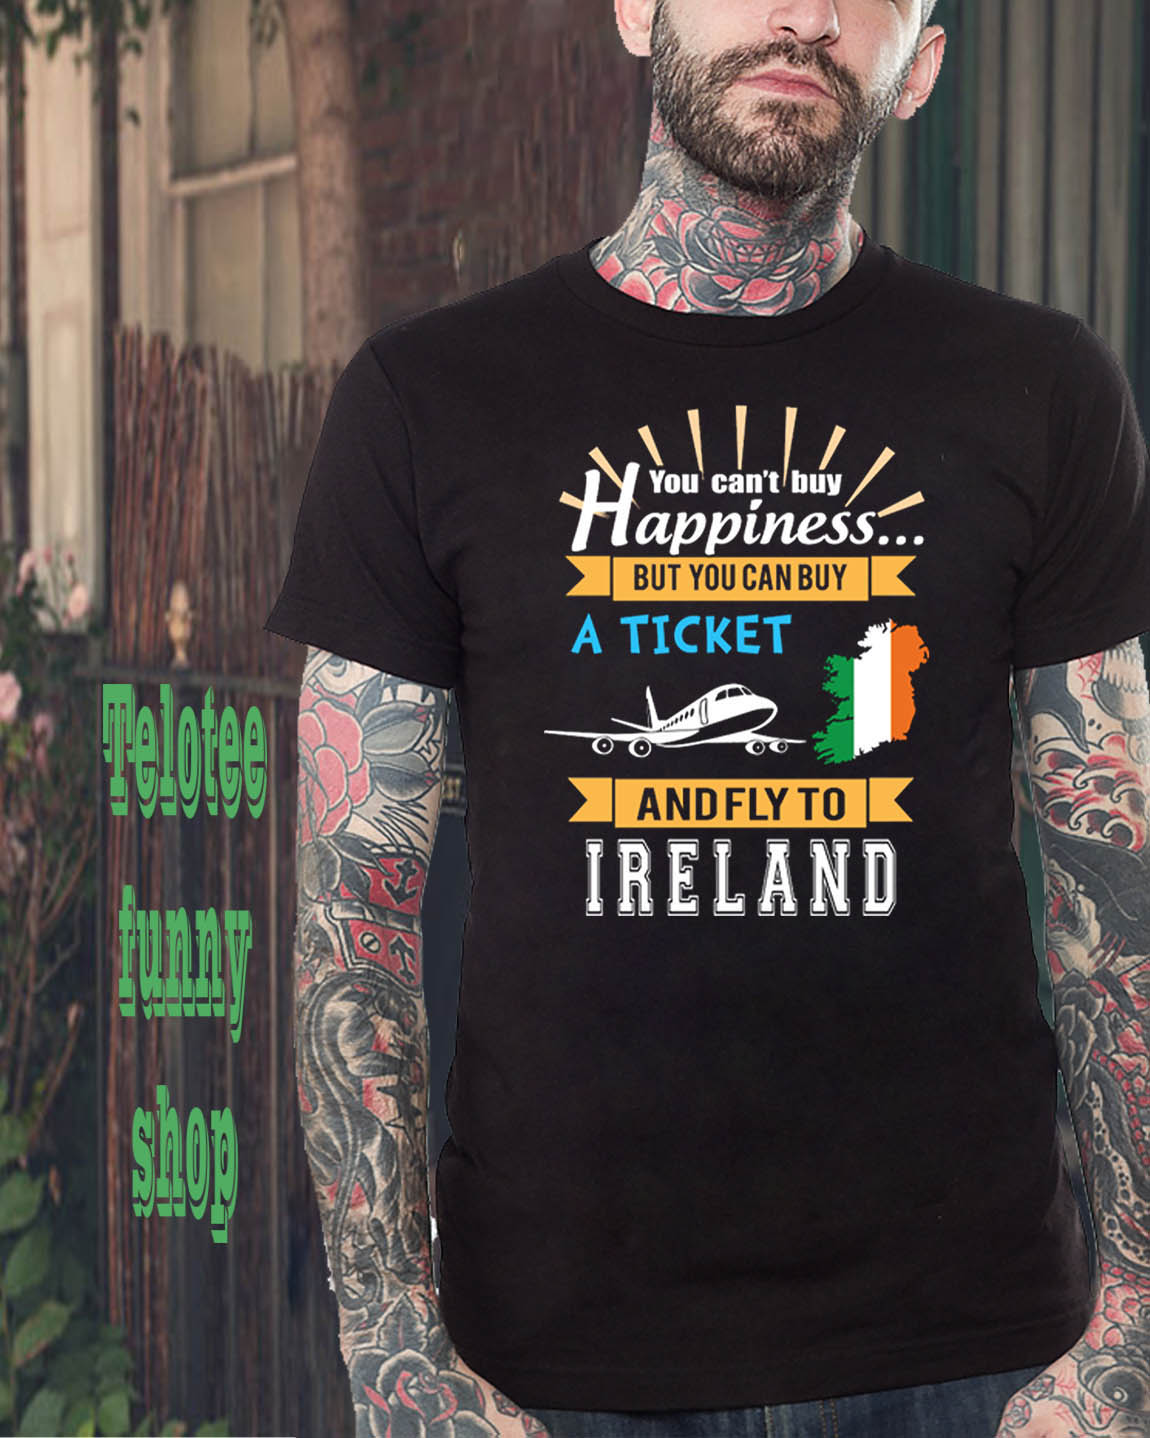 You can’t buy happiness but you can buy a ticket and fly to Ireland